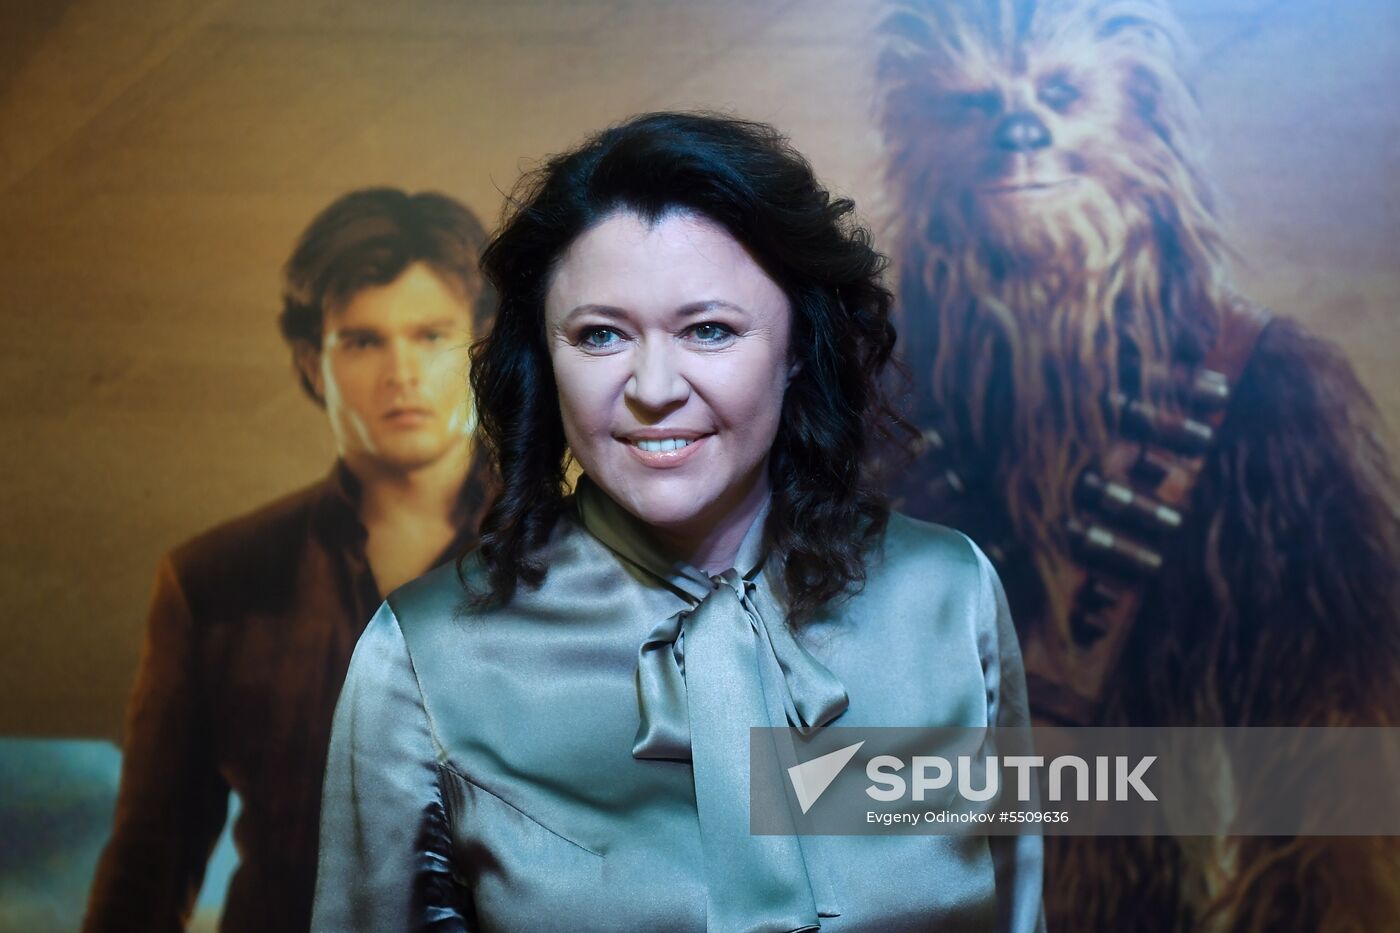 Moscow premiere of Solo: A Star Wars Story